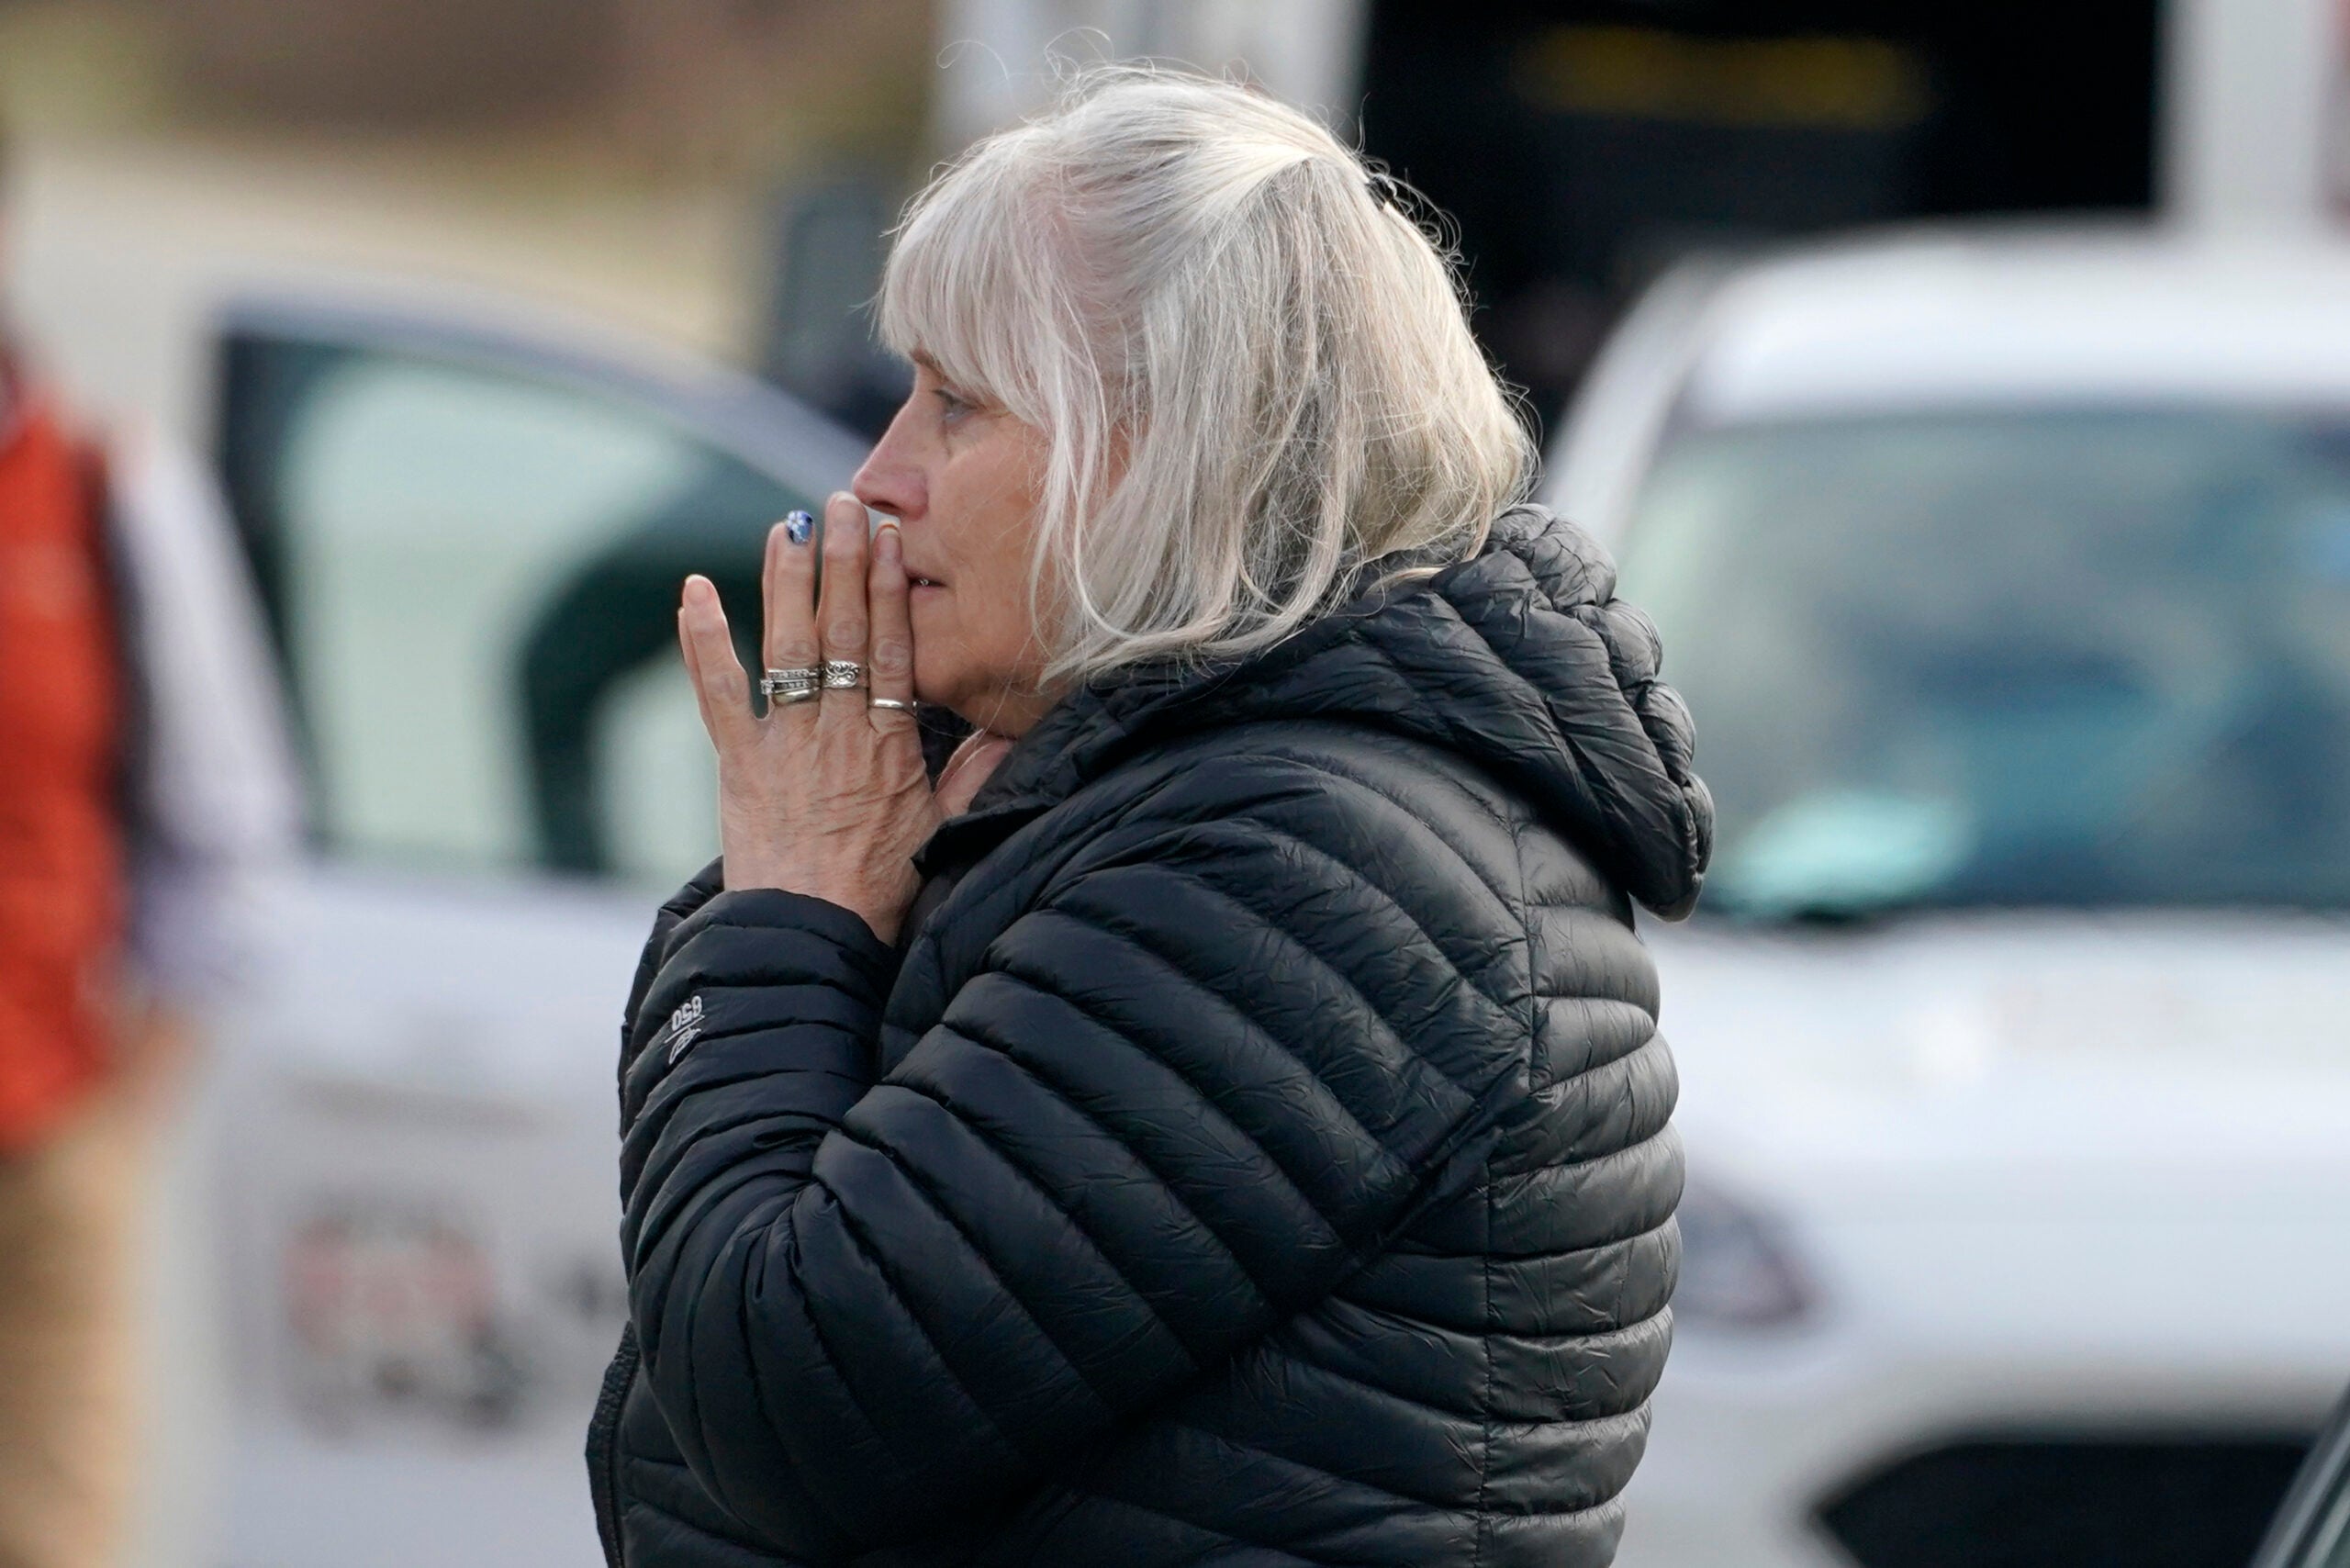 A woman reacts at the scene of a multiple shooting, Tuesday, April 18, 2023, in Bowdoin, Maine.